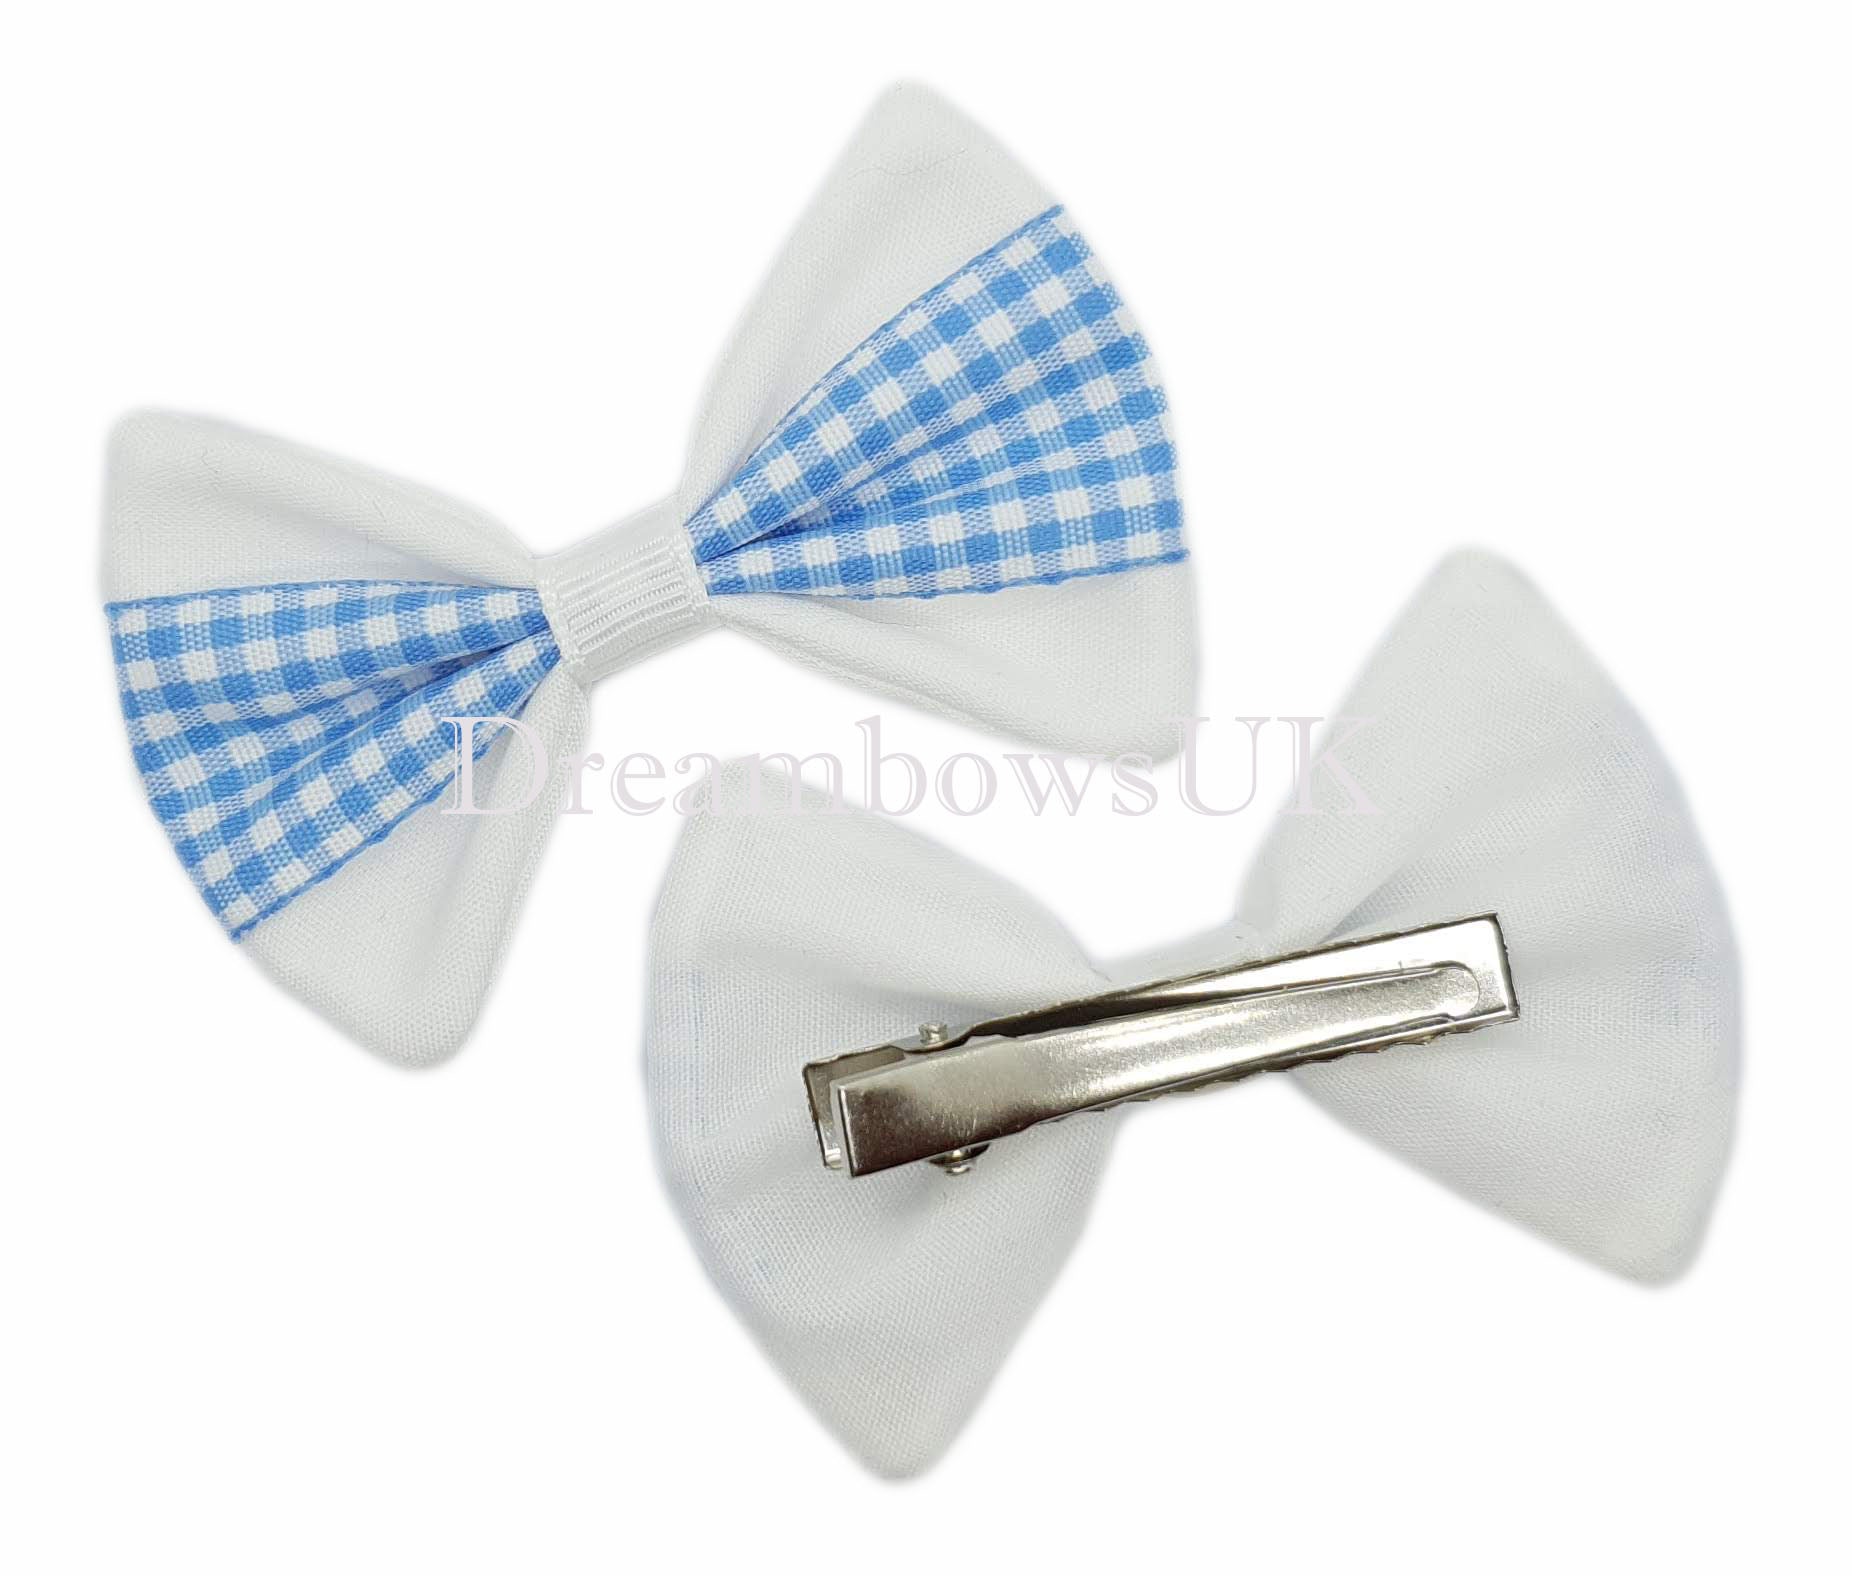 Baby blue and white gingham hair accessory bows on crocodile clips